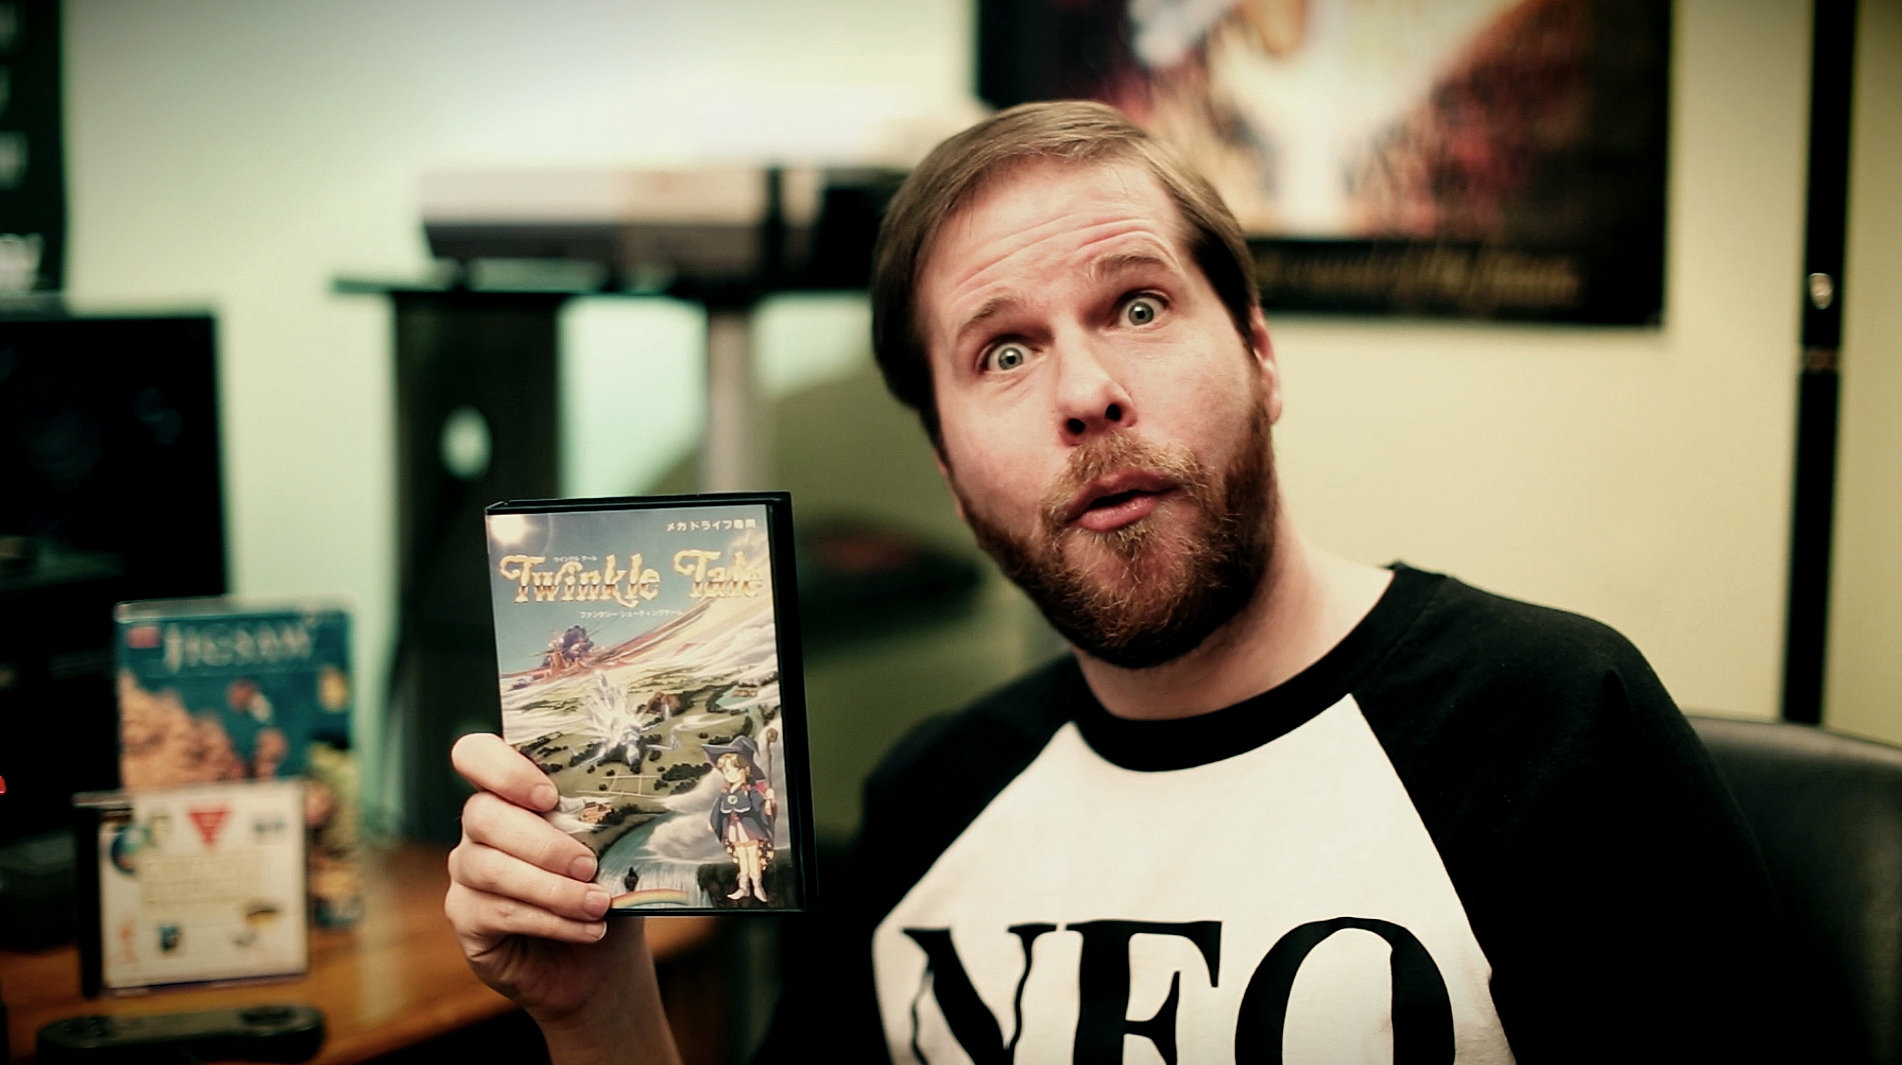 Joe is stunned to hold up a copy of Twinkle Take for the Mega Drive.